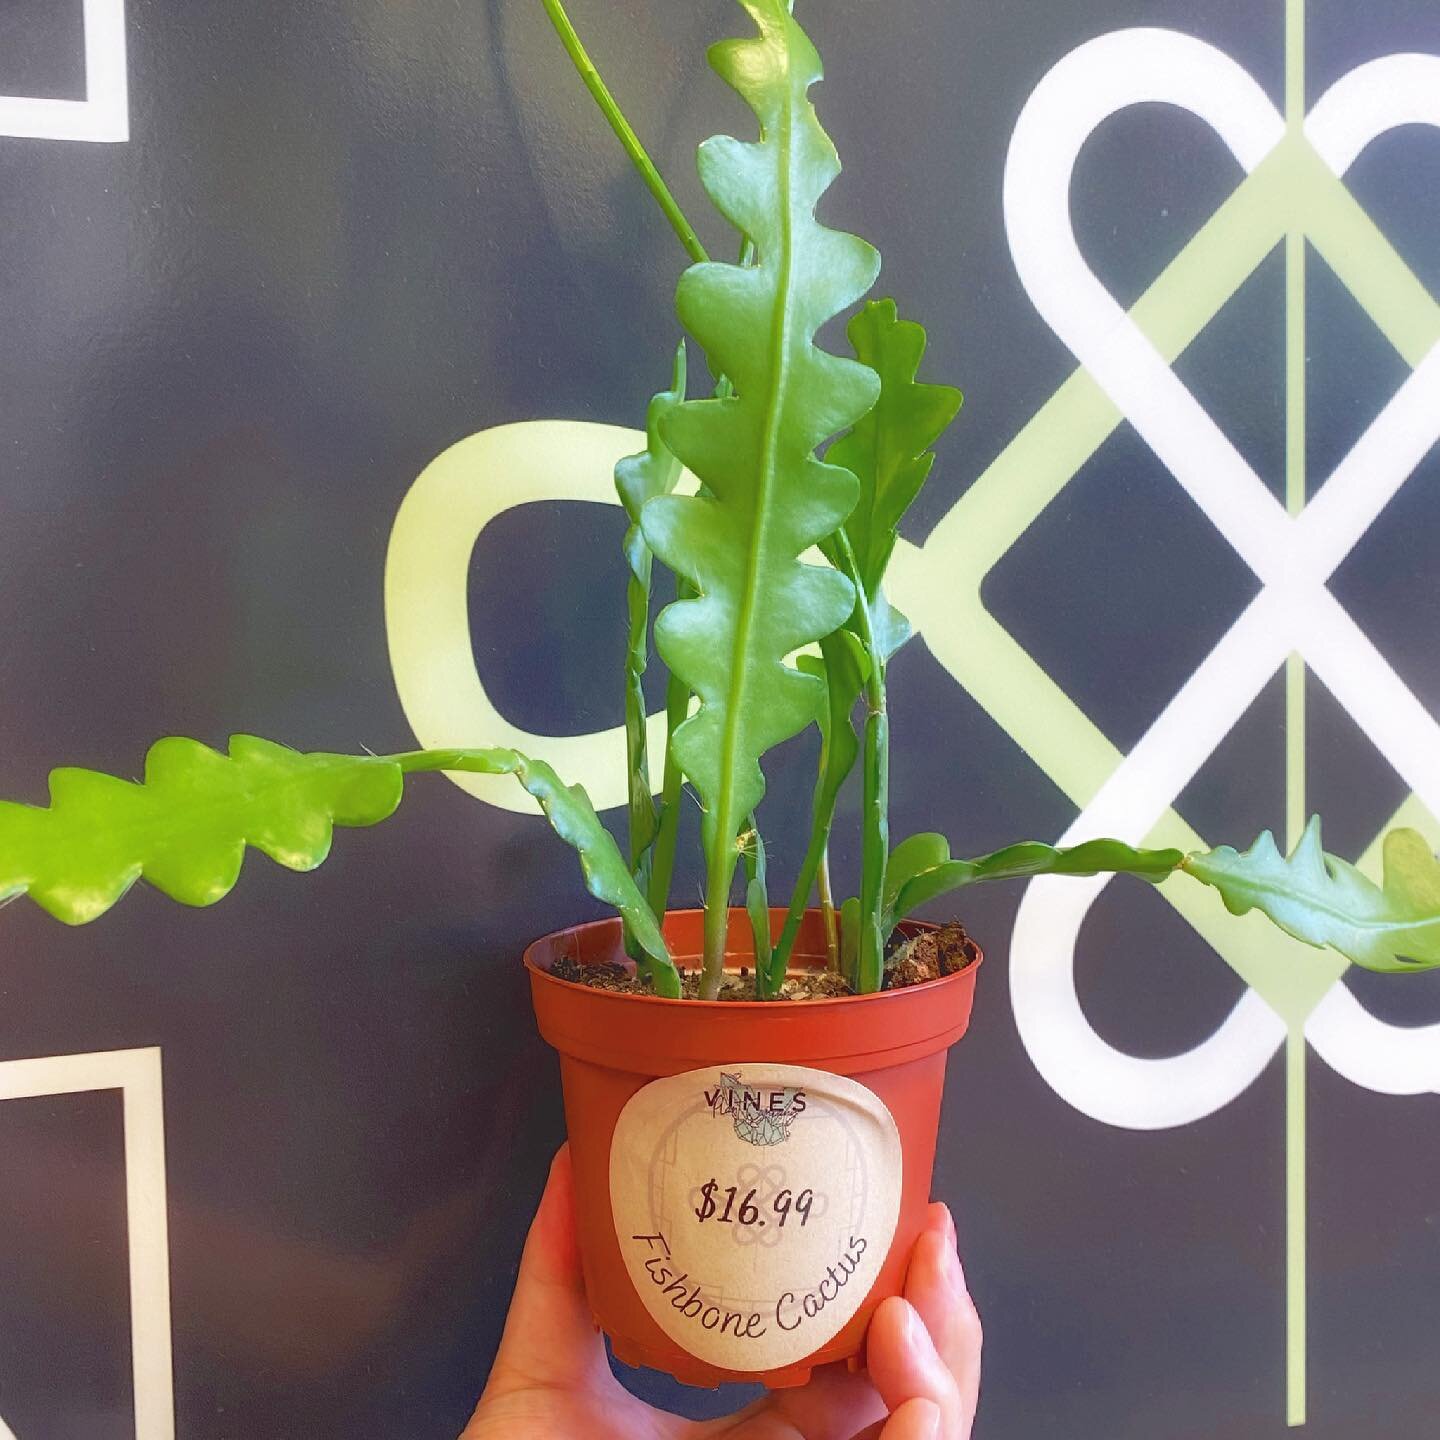 Happy Thursday! Thank you Brandon @vinesplantco for introducing adorable new plants 🌱 into our clinic space! This plant looks so neat!
.
.
.